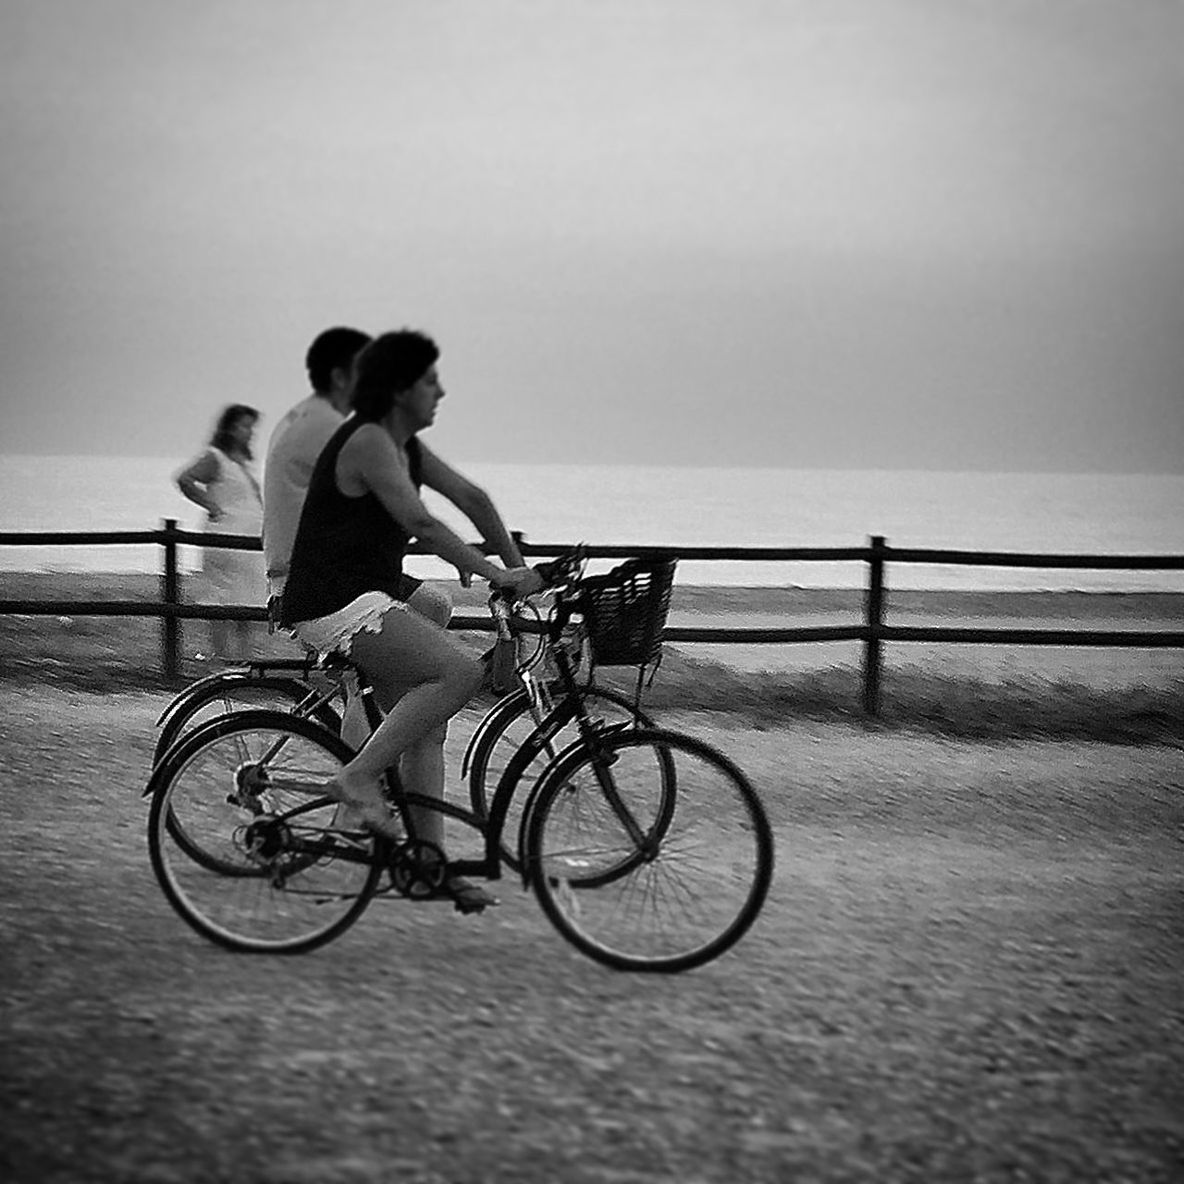 bicycle, sea, transportation, mode of transport, men, full length, leisure activity, lifestyles, water, horizon over water, riding, beach, land vehicle, clear sky, copy space, rear view, cycling, side view